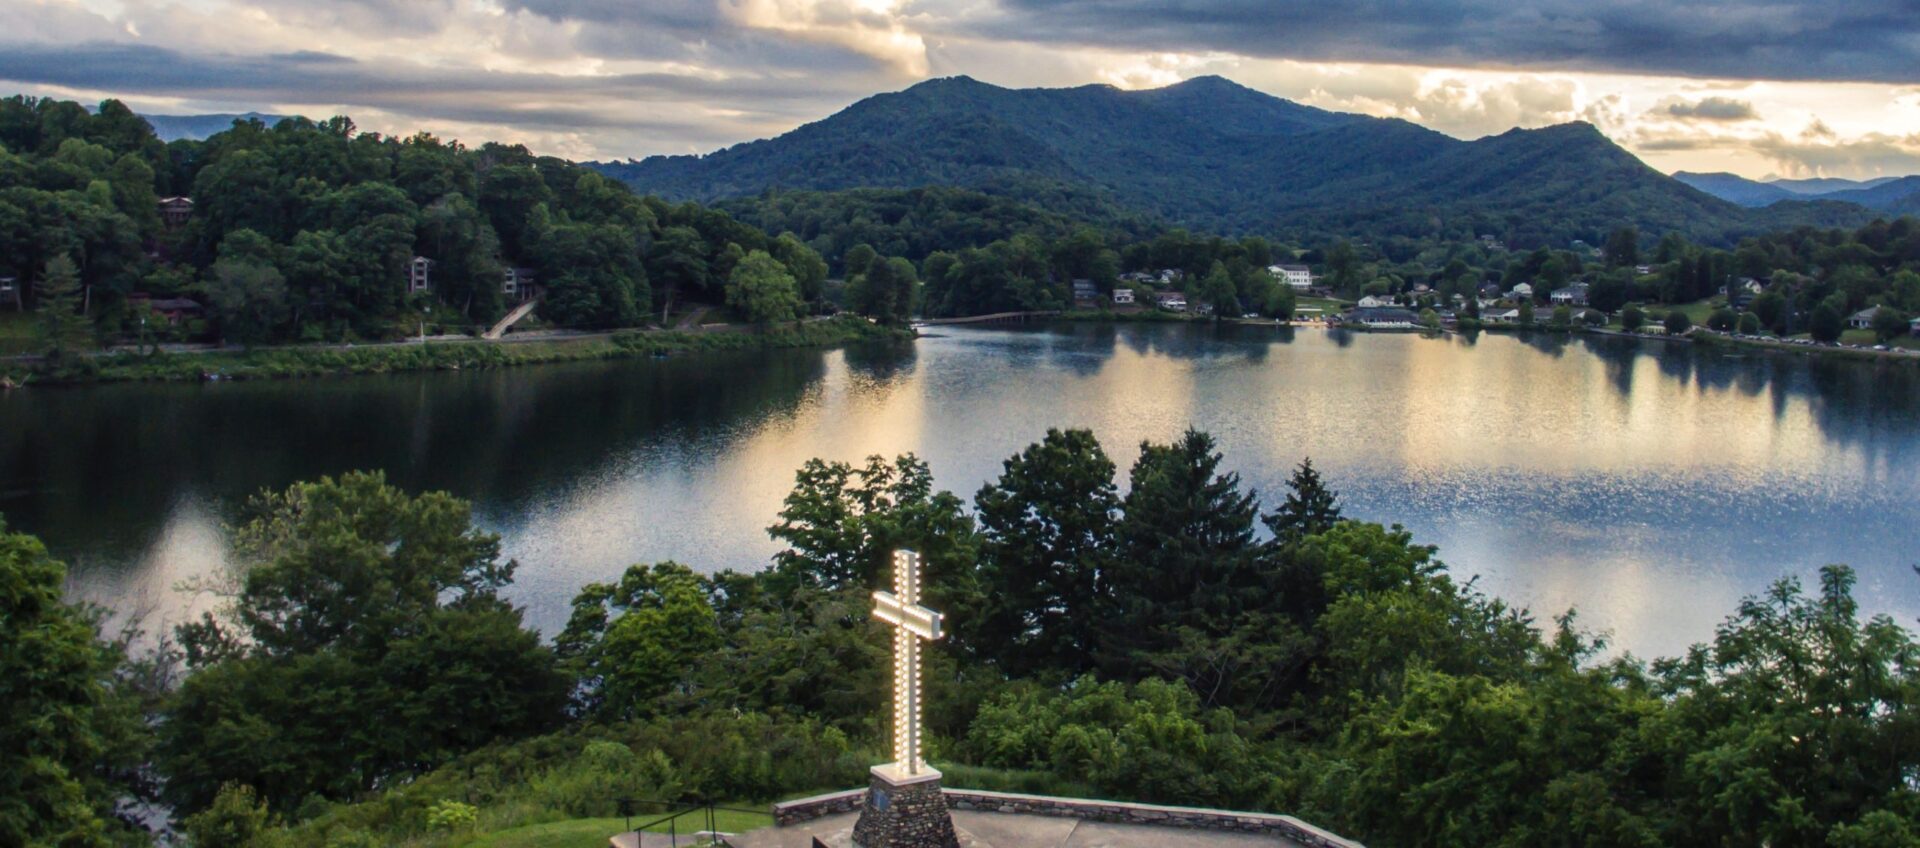 Photo of Lake Junaluska with the large cross in the foreground